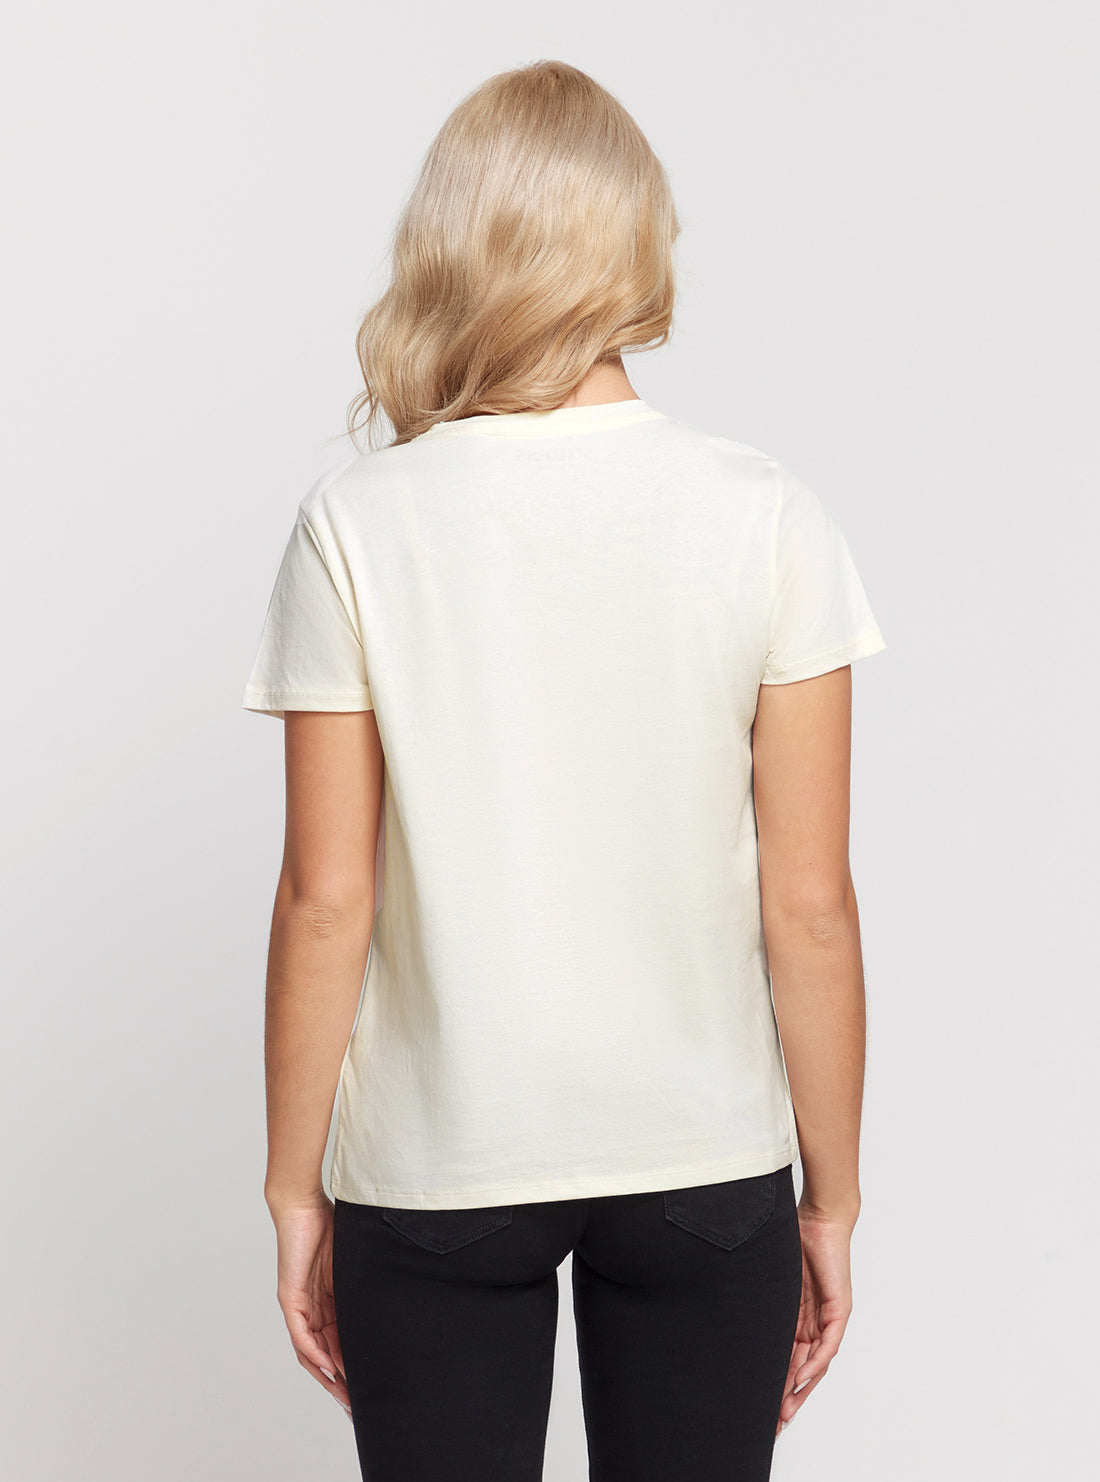 GUESS Cream Short Sleeves Lace Logo T-Shirt back view